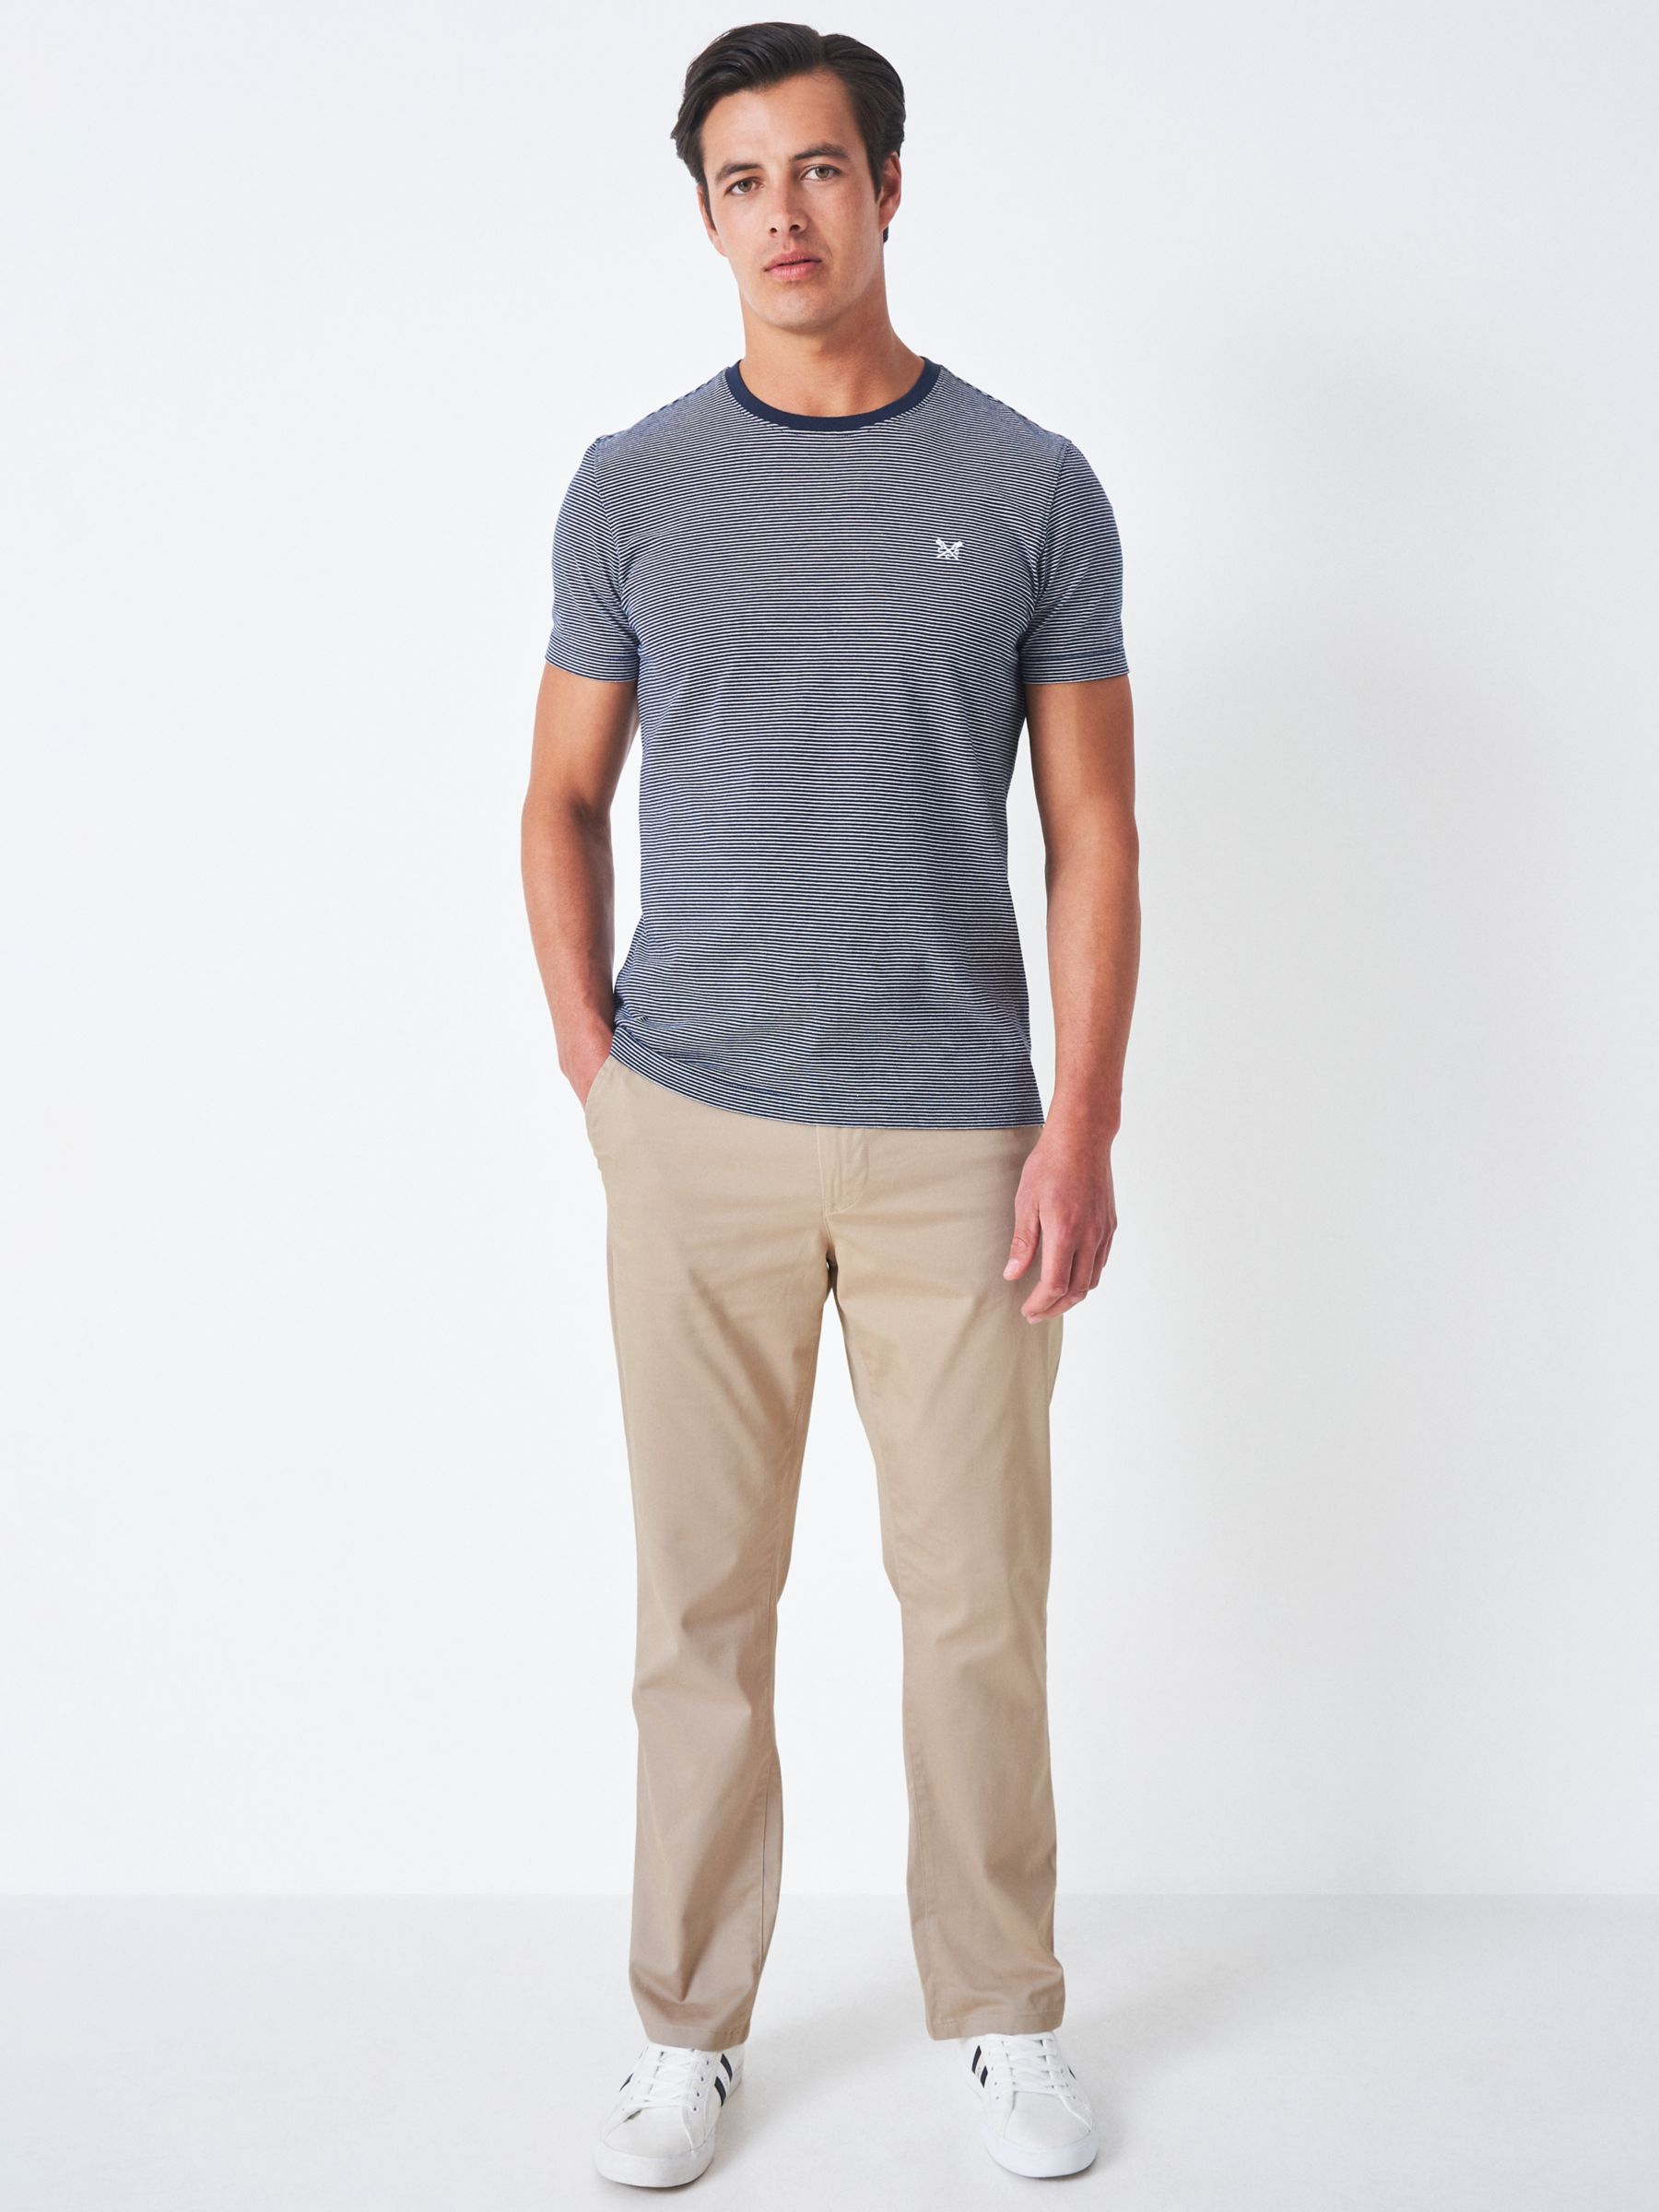 Crew Clothing Straight Fit Chinos, Stone, 30S